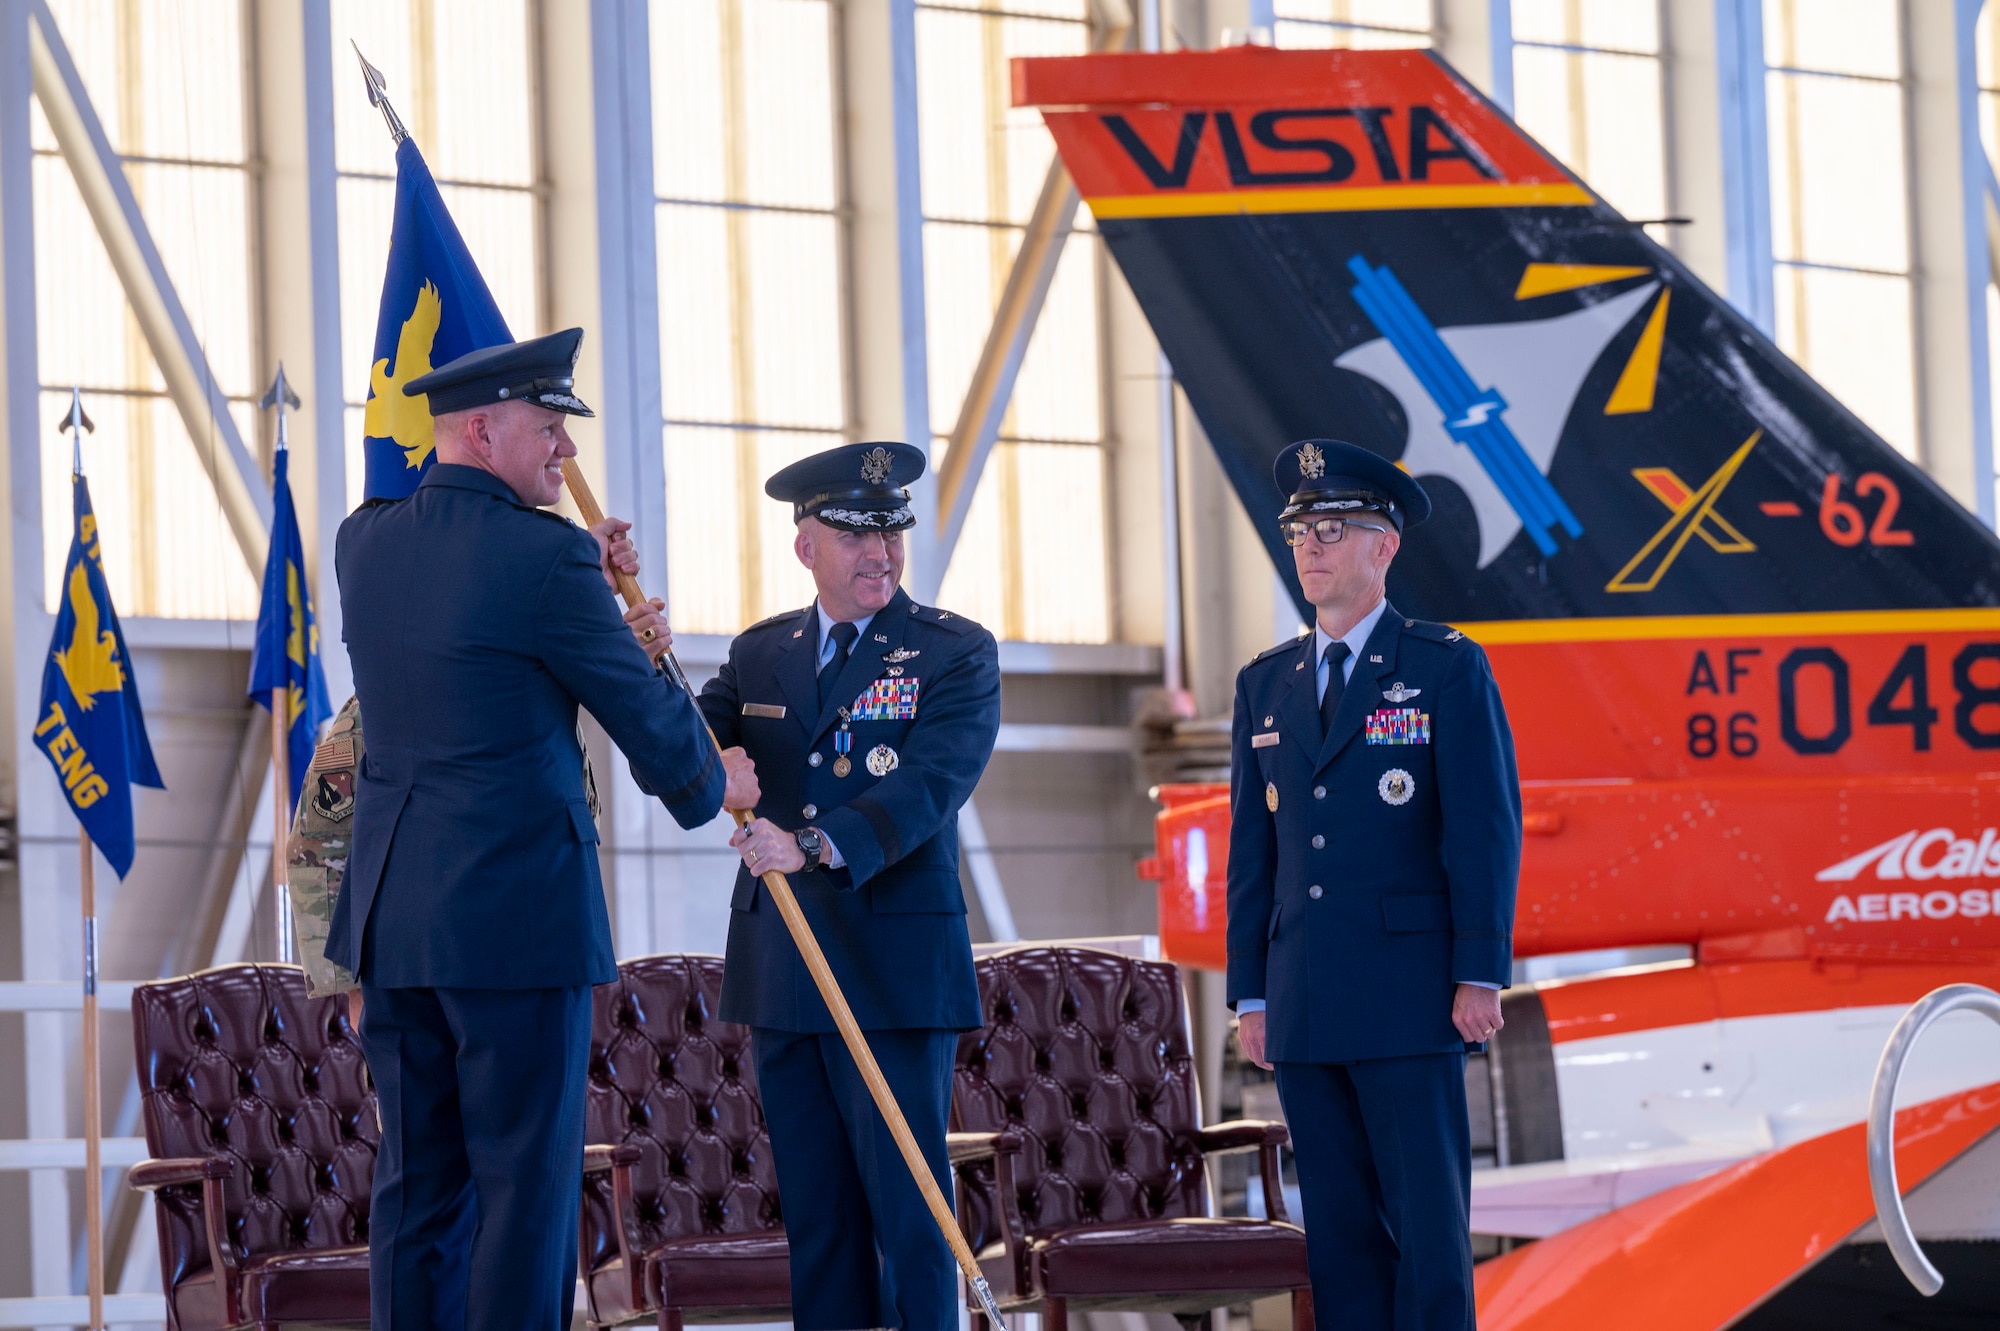 Brig. Gen. Matthew Higer, the outgoing 412th Test Wing Commander, relinquishes his command of the Wing by returning the unit’s guidon to Maj. Gen. Evan Dertien, Air Force Test Center commander, during the Wing’s Change of Command Ceremony at Edwards Air Force Base, California, Aug.18.